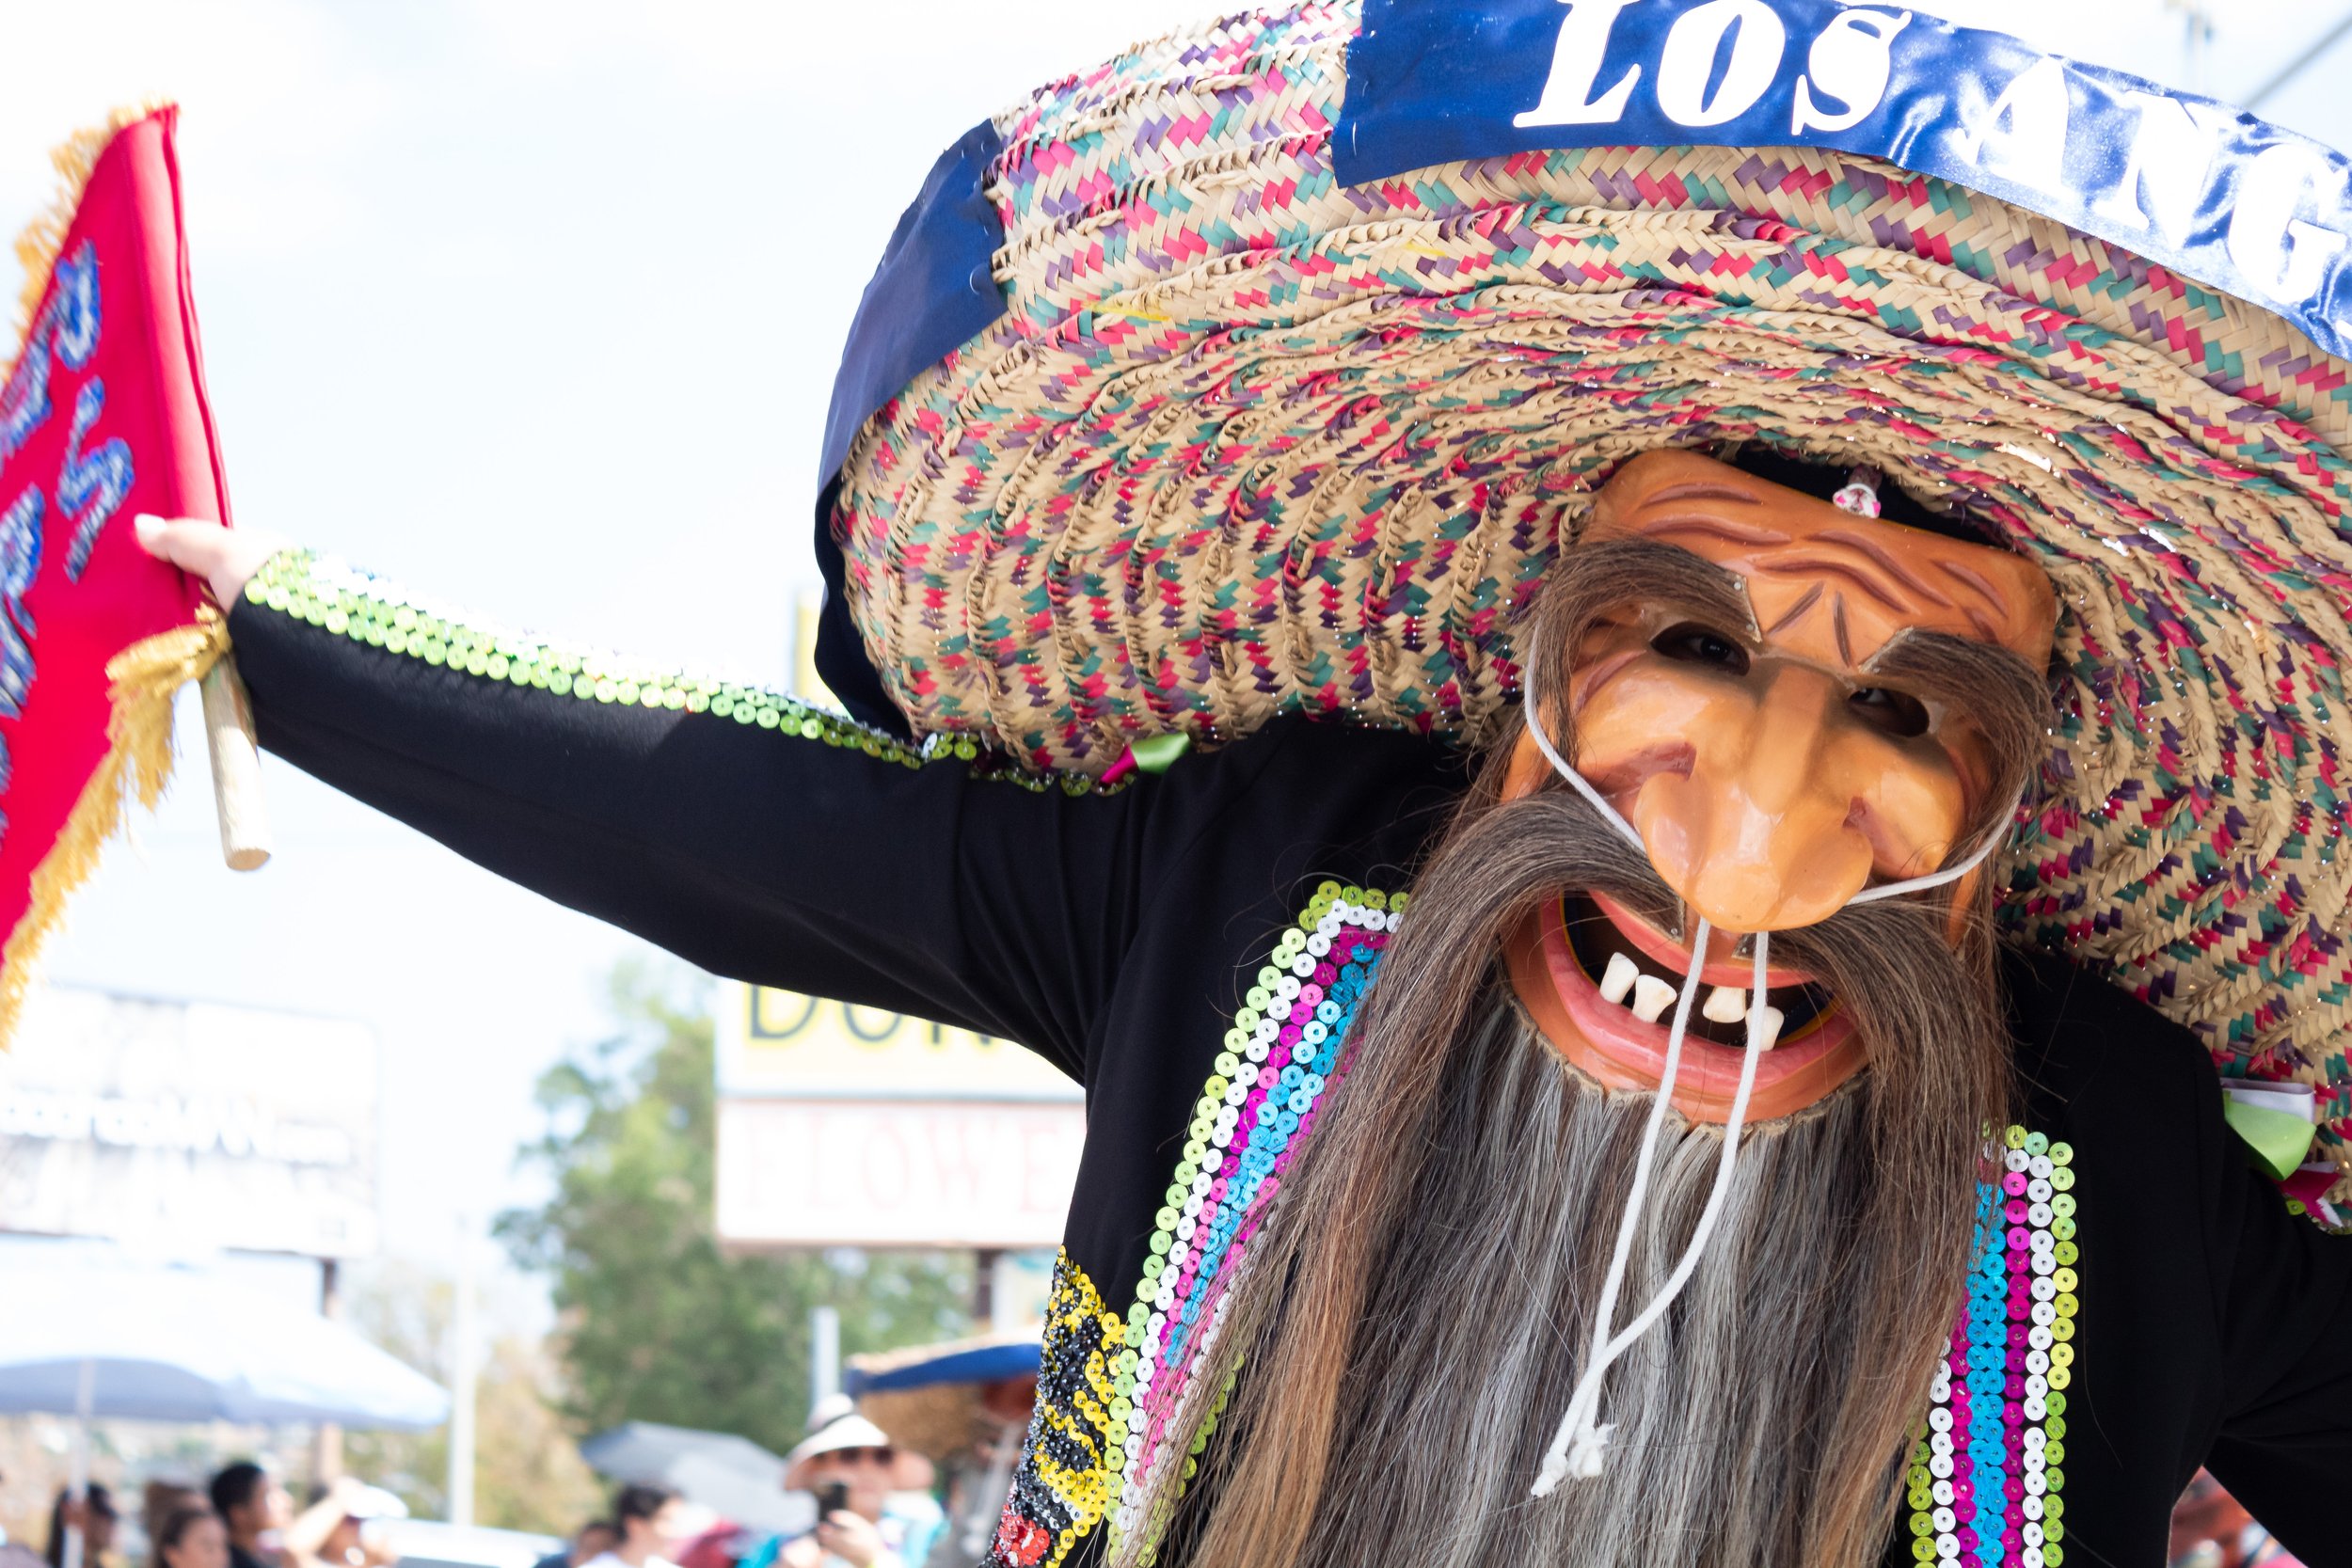  A Moranchi elder, from a performance of Danza de los Tecuanes (The Dance of Jaguars), during the Mexican Independence Day Parade & Festival. The dance is a display of two tribes, Moranchi and Lucas, coming together to capture the jaguar in pre-hispa